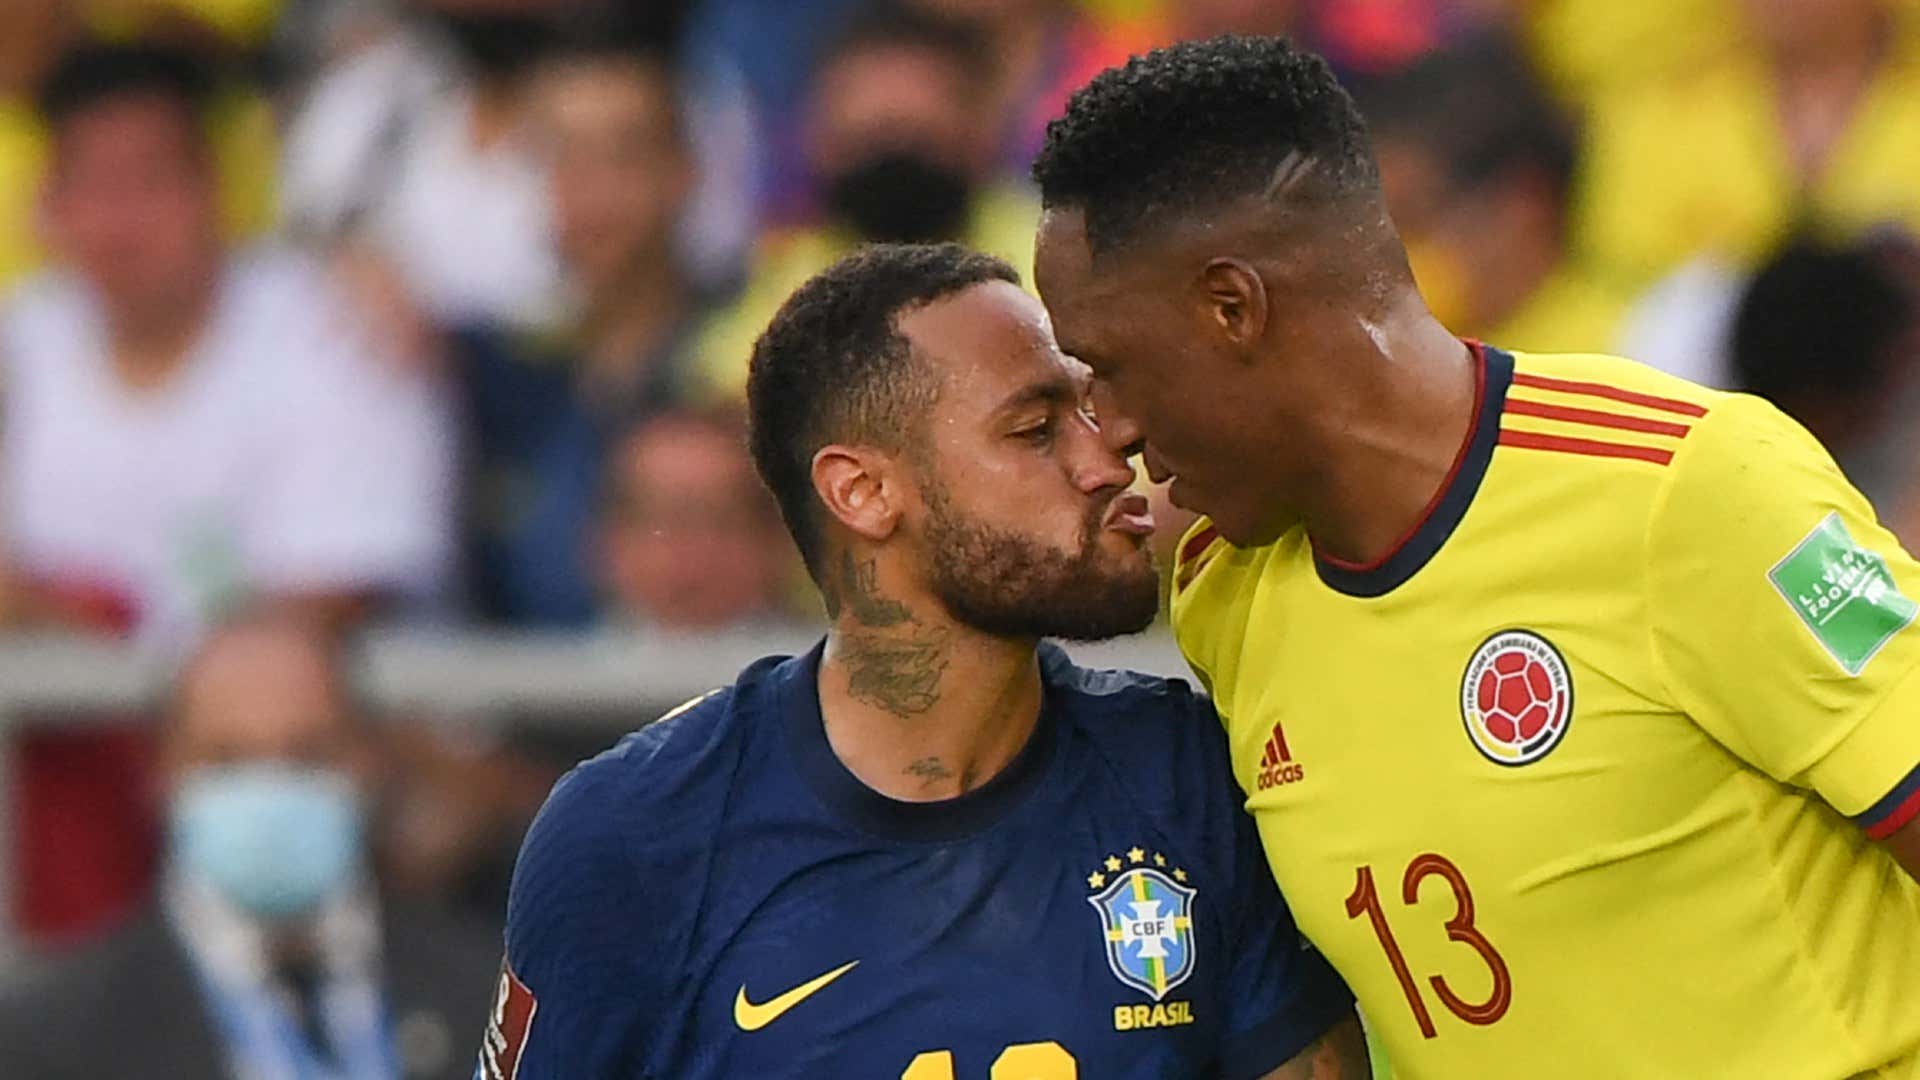 'Neymar can't make the difference all the time' – Tite defends 'exceptional' Brazil star after Colombia draw